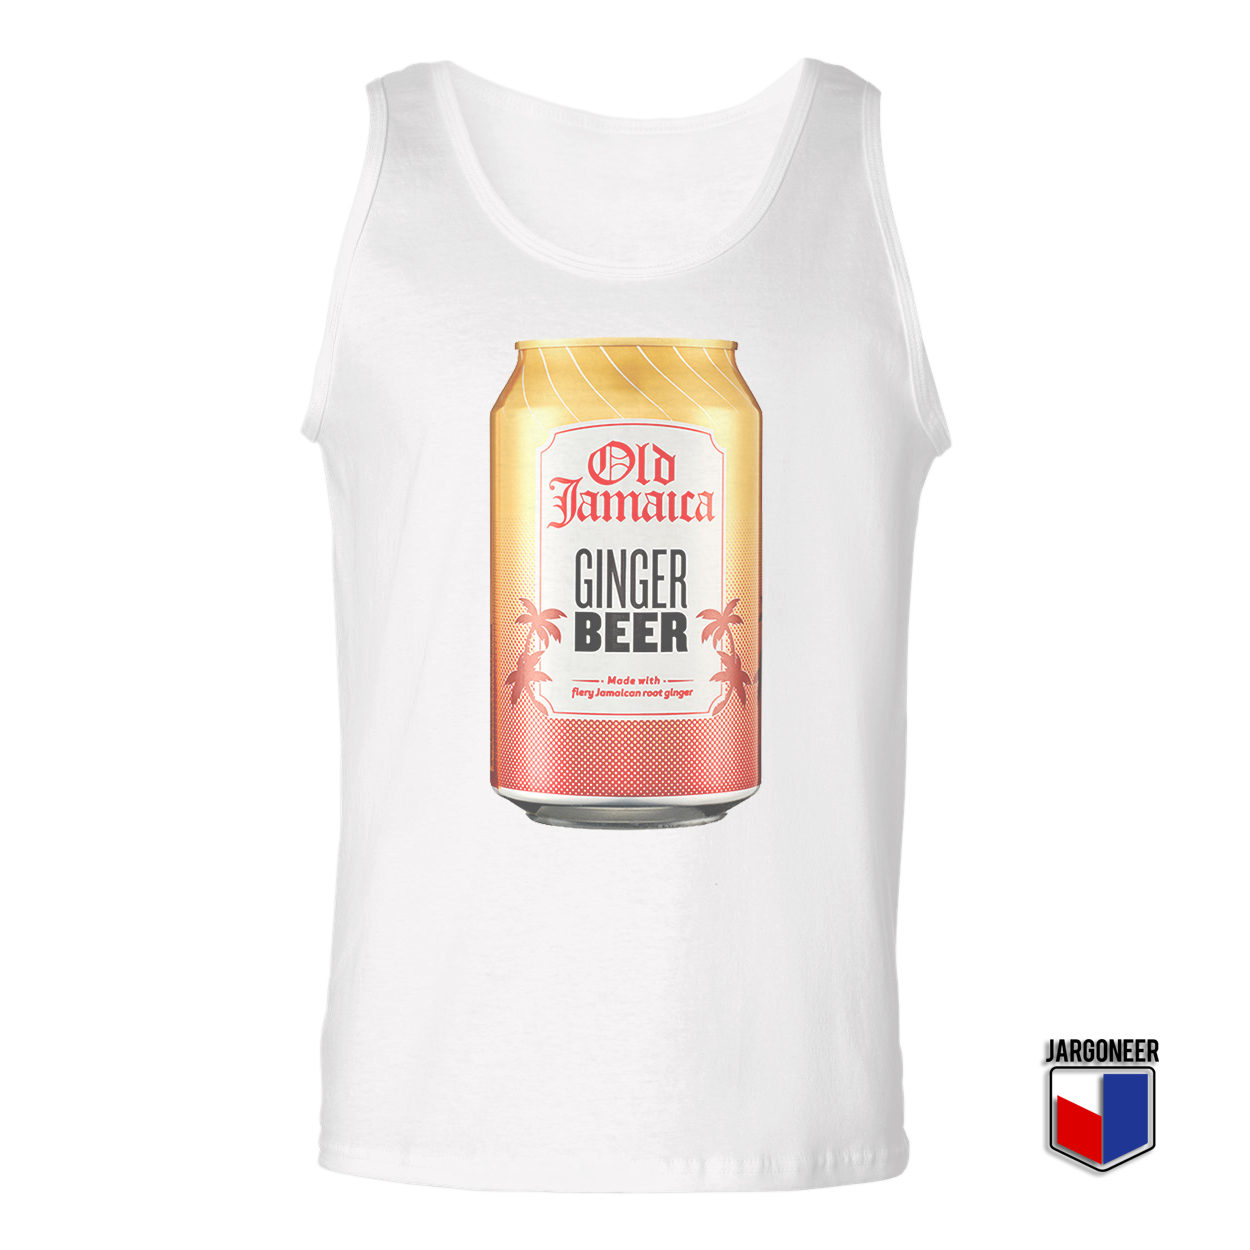 Old Jamaica Root Ginger Tin White Tank Top - Shop Unique Graphic Cool Shirt Designs